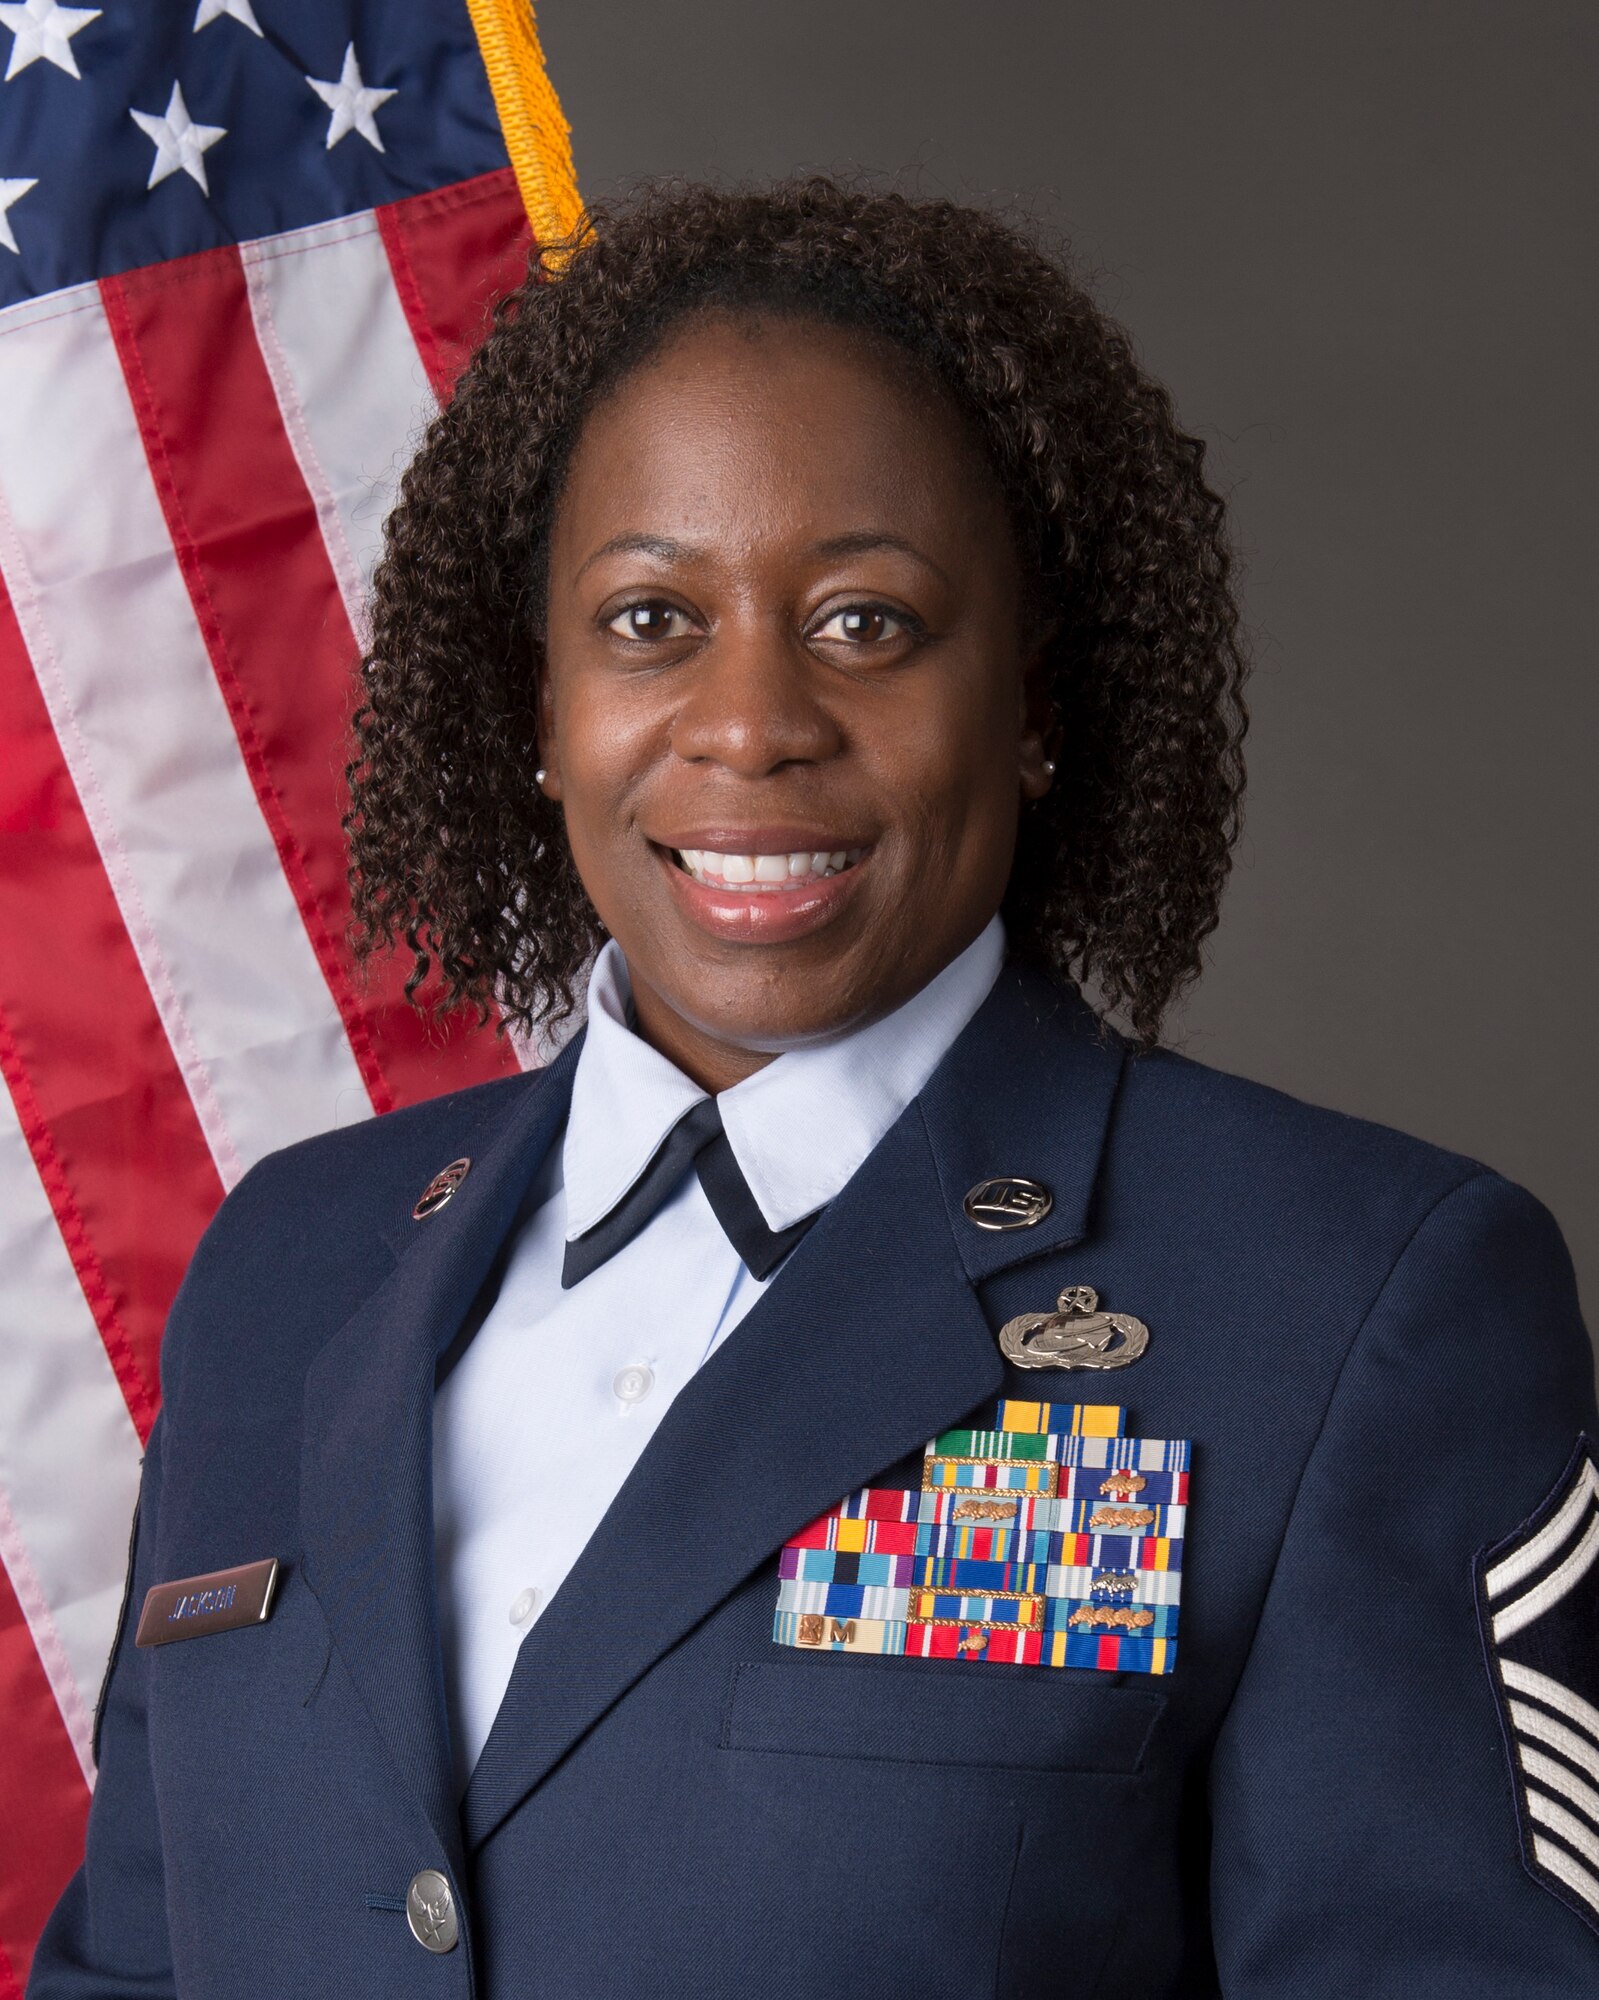 Senior Master Sgt. Venita Smith, assigned to the 107th Attack Wing, receives the NAACP Roy Wilkins Renown Service Award for 2020, Niagara Falls, N.Y., June 22, 2020. Smith is the Air National Guard recipient of the award which is presented annually to members of the armed forces in recognition of their efforts in promoting civil rights and epitomize the qualities and core values of their respective service. (U.S. Air National Guard photo by 107th Attack Wing)